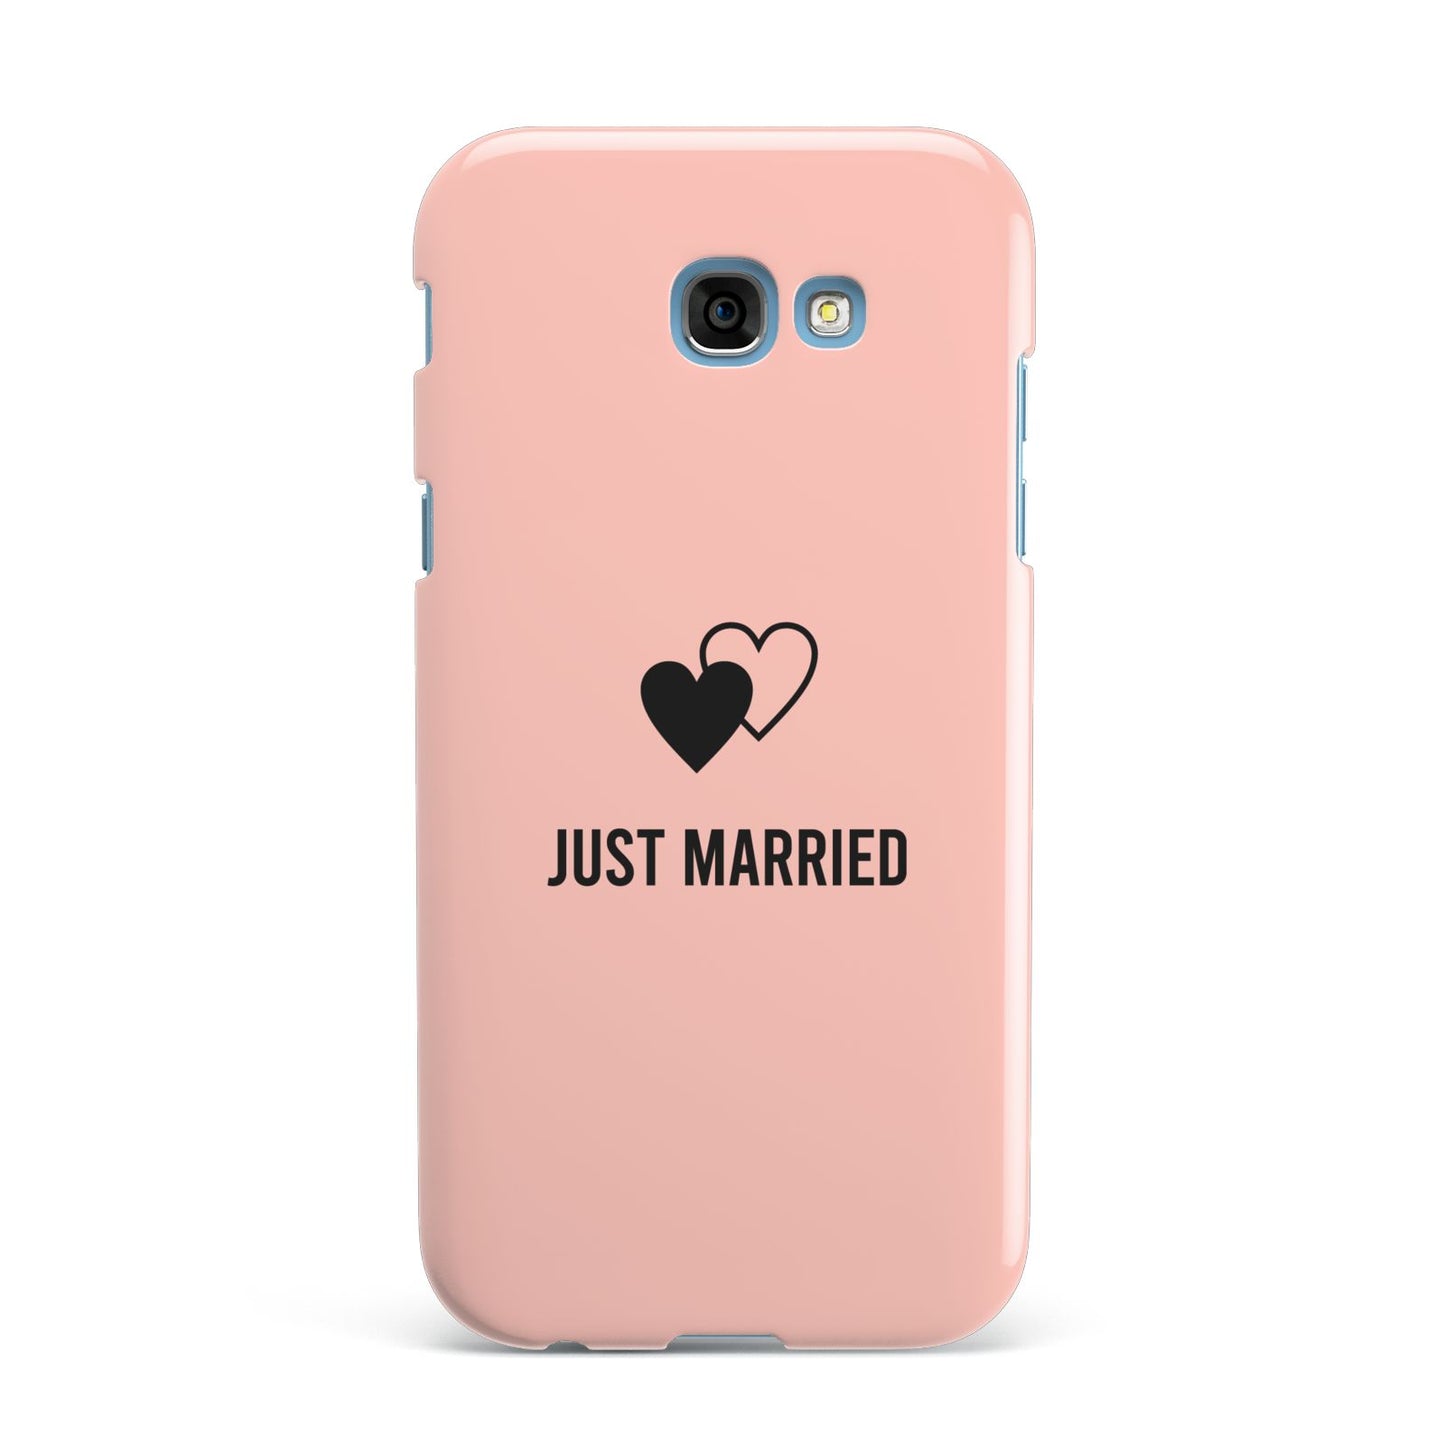 Just Married Samsung Galaxy A7 2017 Case